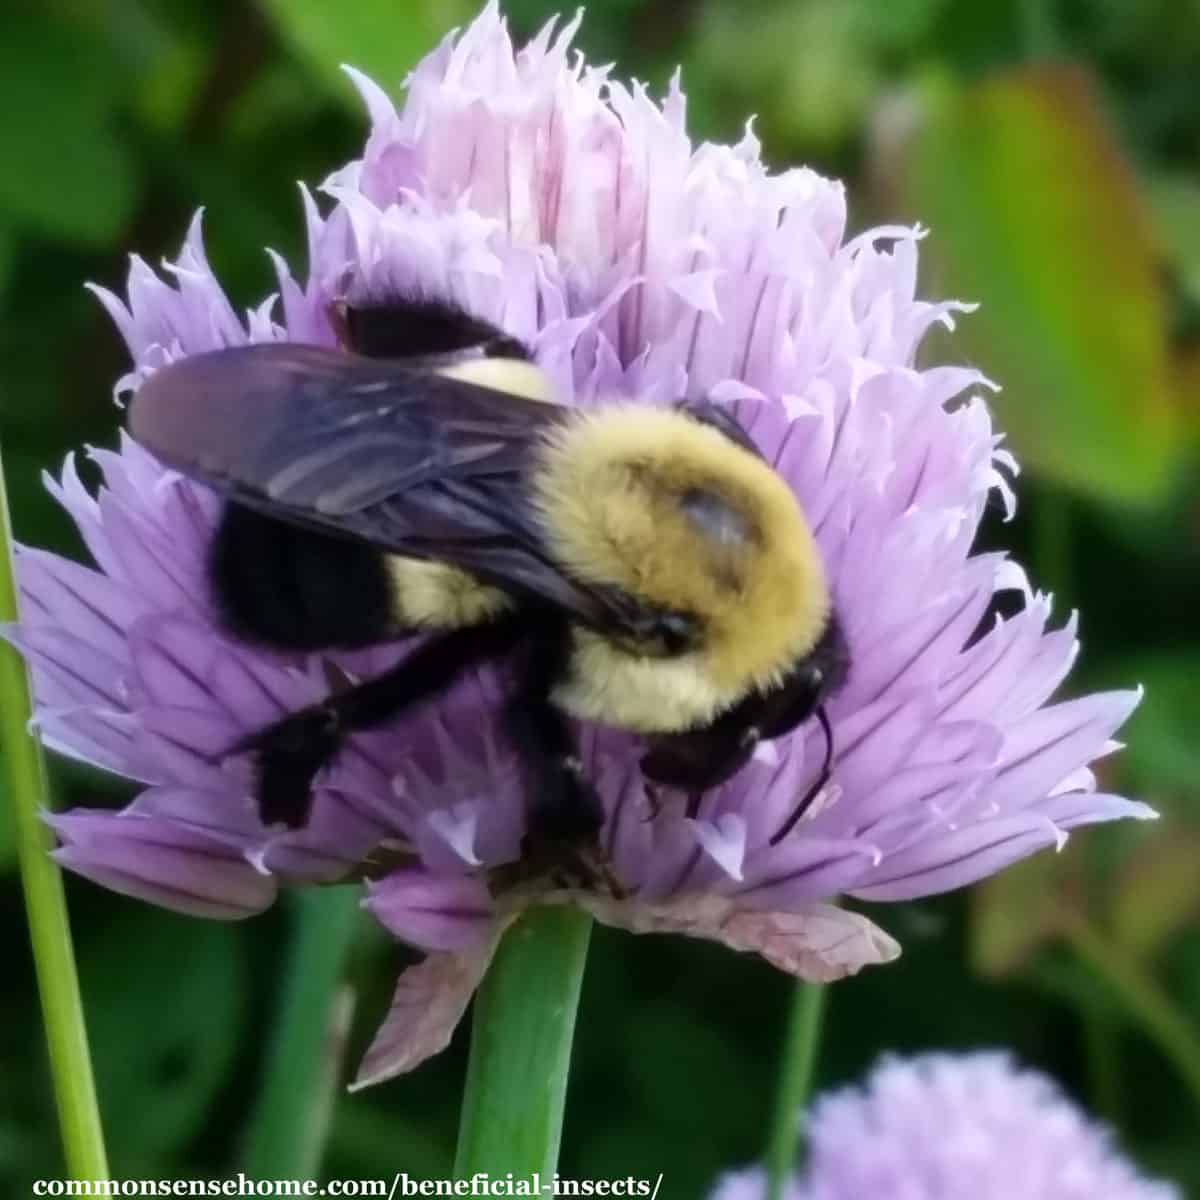 bumblebee on chive flower